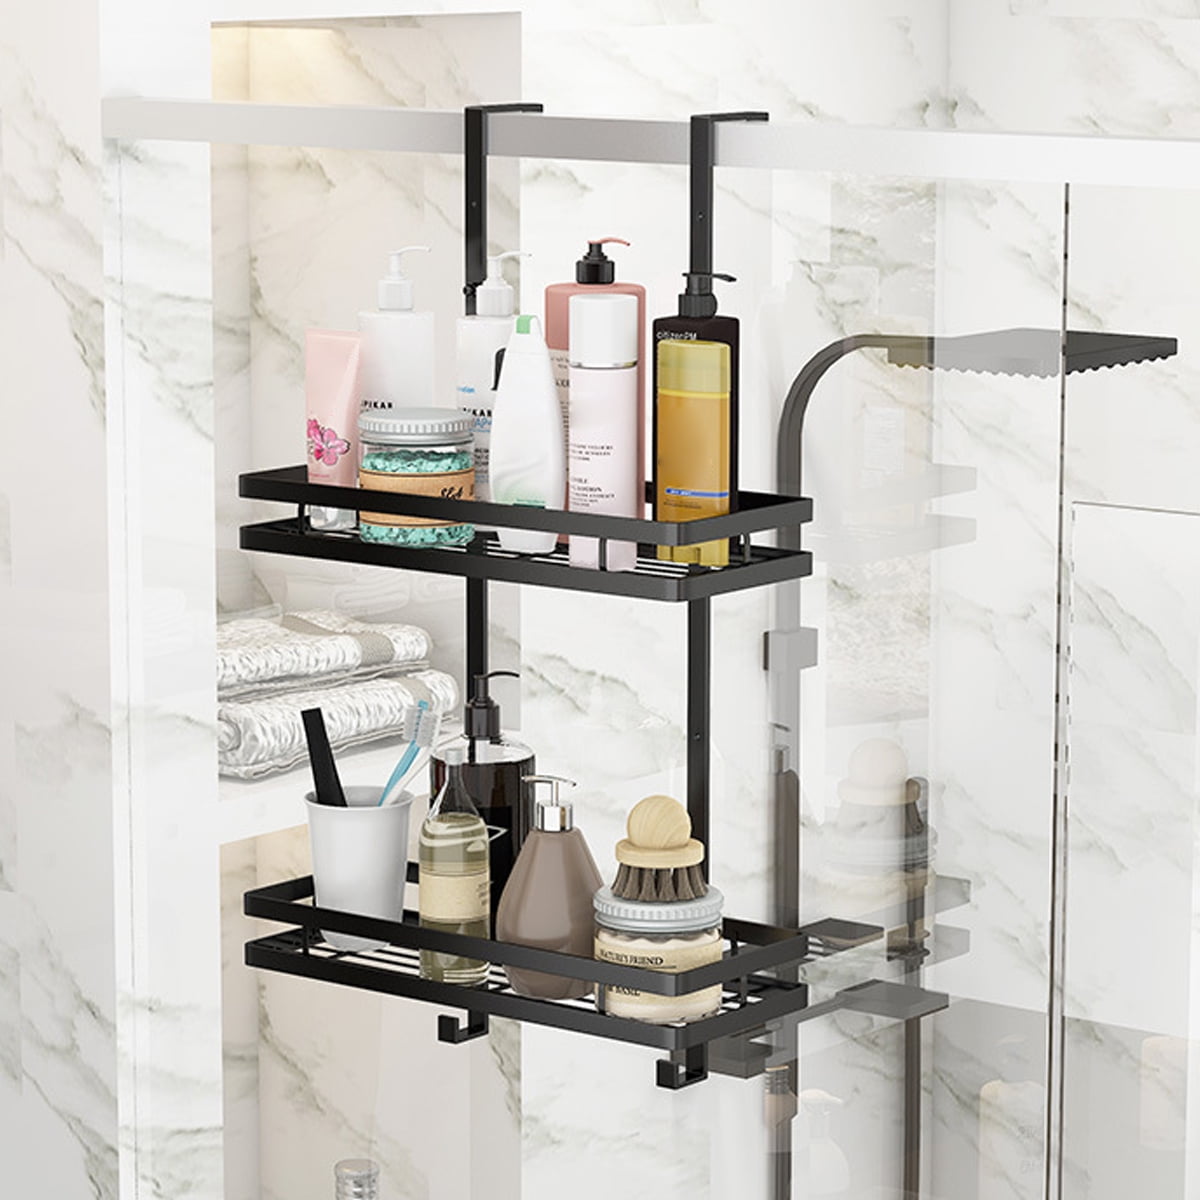 LEVERLOC Suction Cup Corner Shower Shelf - No Drilling, Removable Bath  Shelf With Heavy Duty Hold, Waterproof & Oilproof White Shower Organizer  Rack